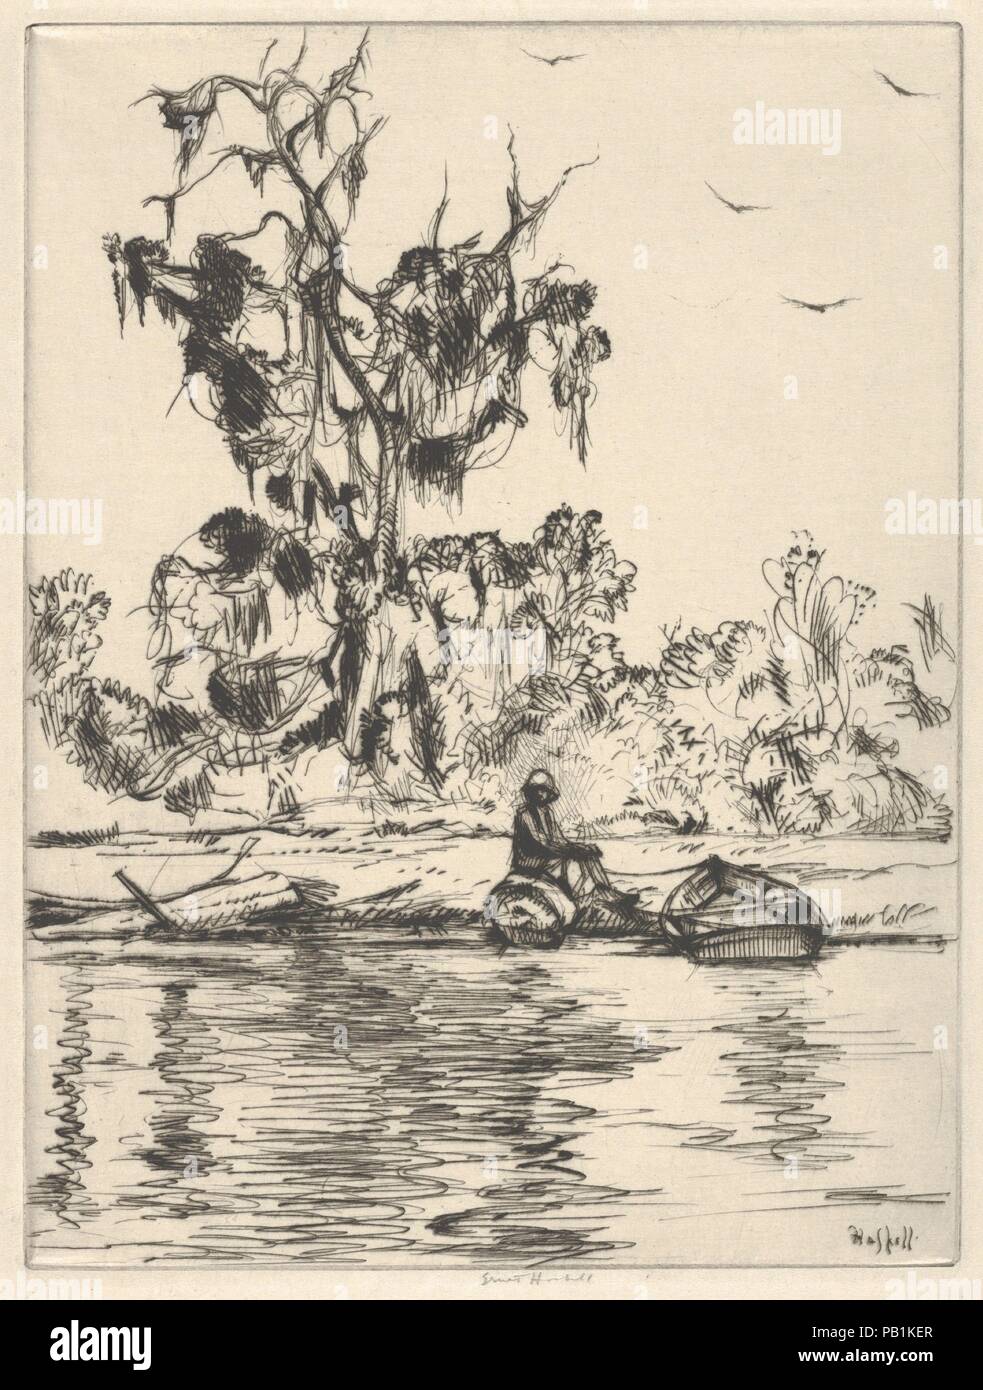 Negress and the Buzzards. Artist: Ernest Haskell (American, Woodstock, Connecticut 1876-1925 West Point, Maine). Dimensions: Sheet: 10 3/4 × 7 13/16 in. (27.3 × 19.8 cm)  Plate: 7 15/16 × 6 in. (20.2 × 15.2 cm). Date: 1915. Museum: Metropolitan Museum of Art, New York, USA. Stock Photo